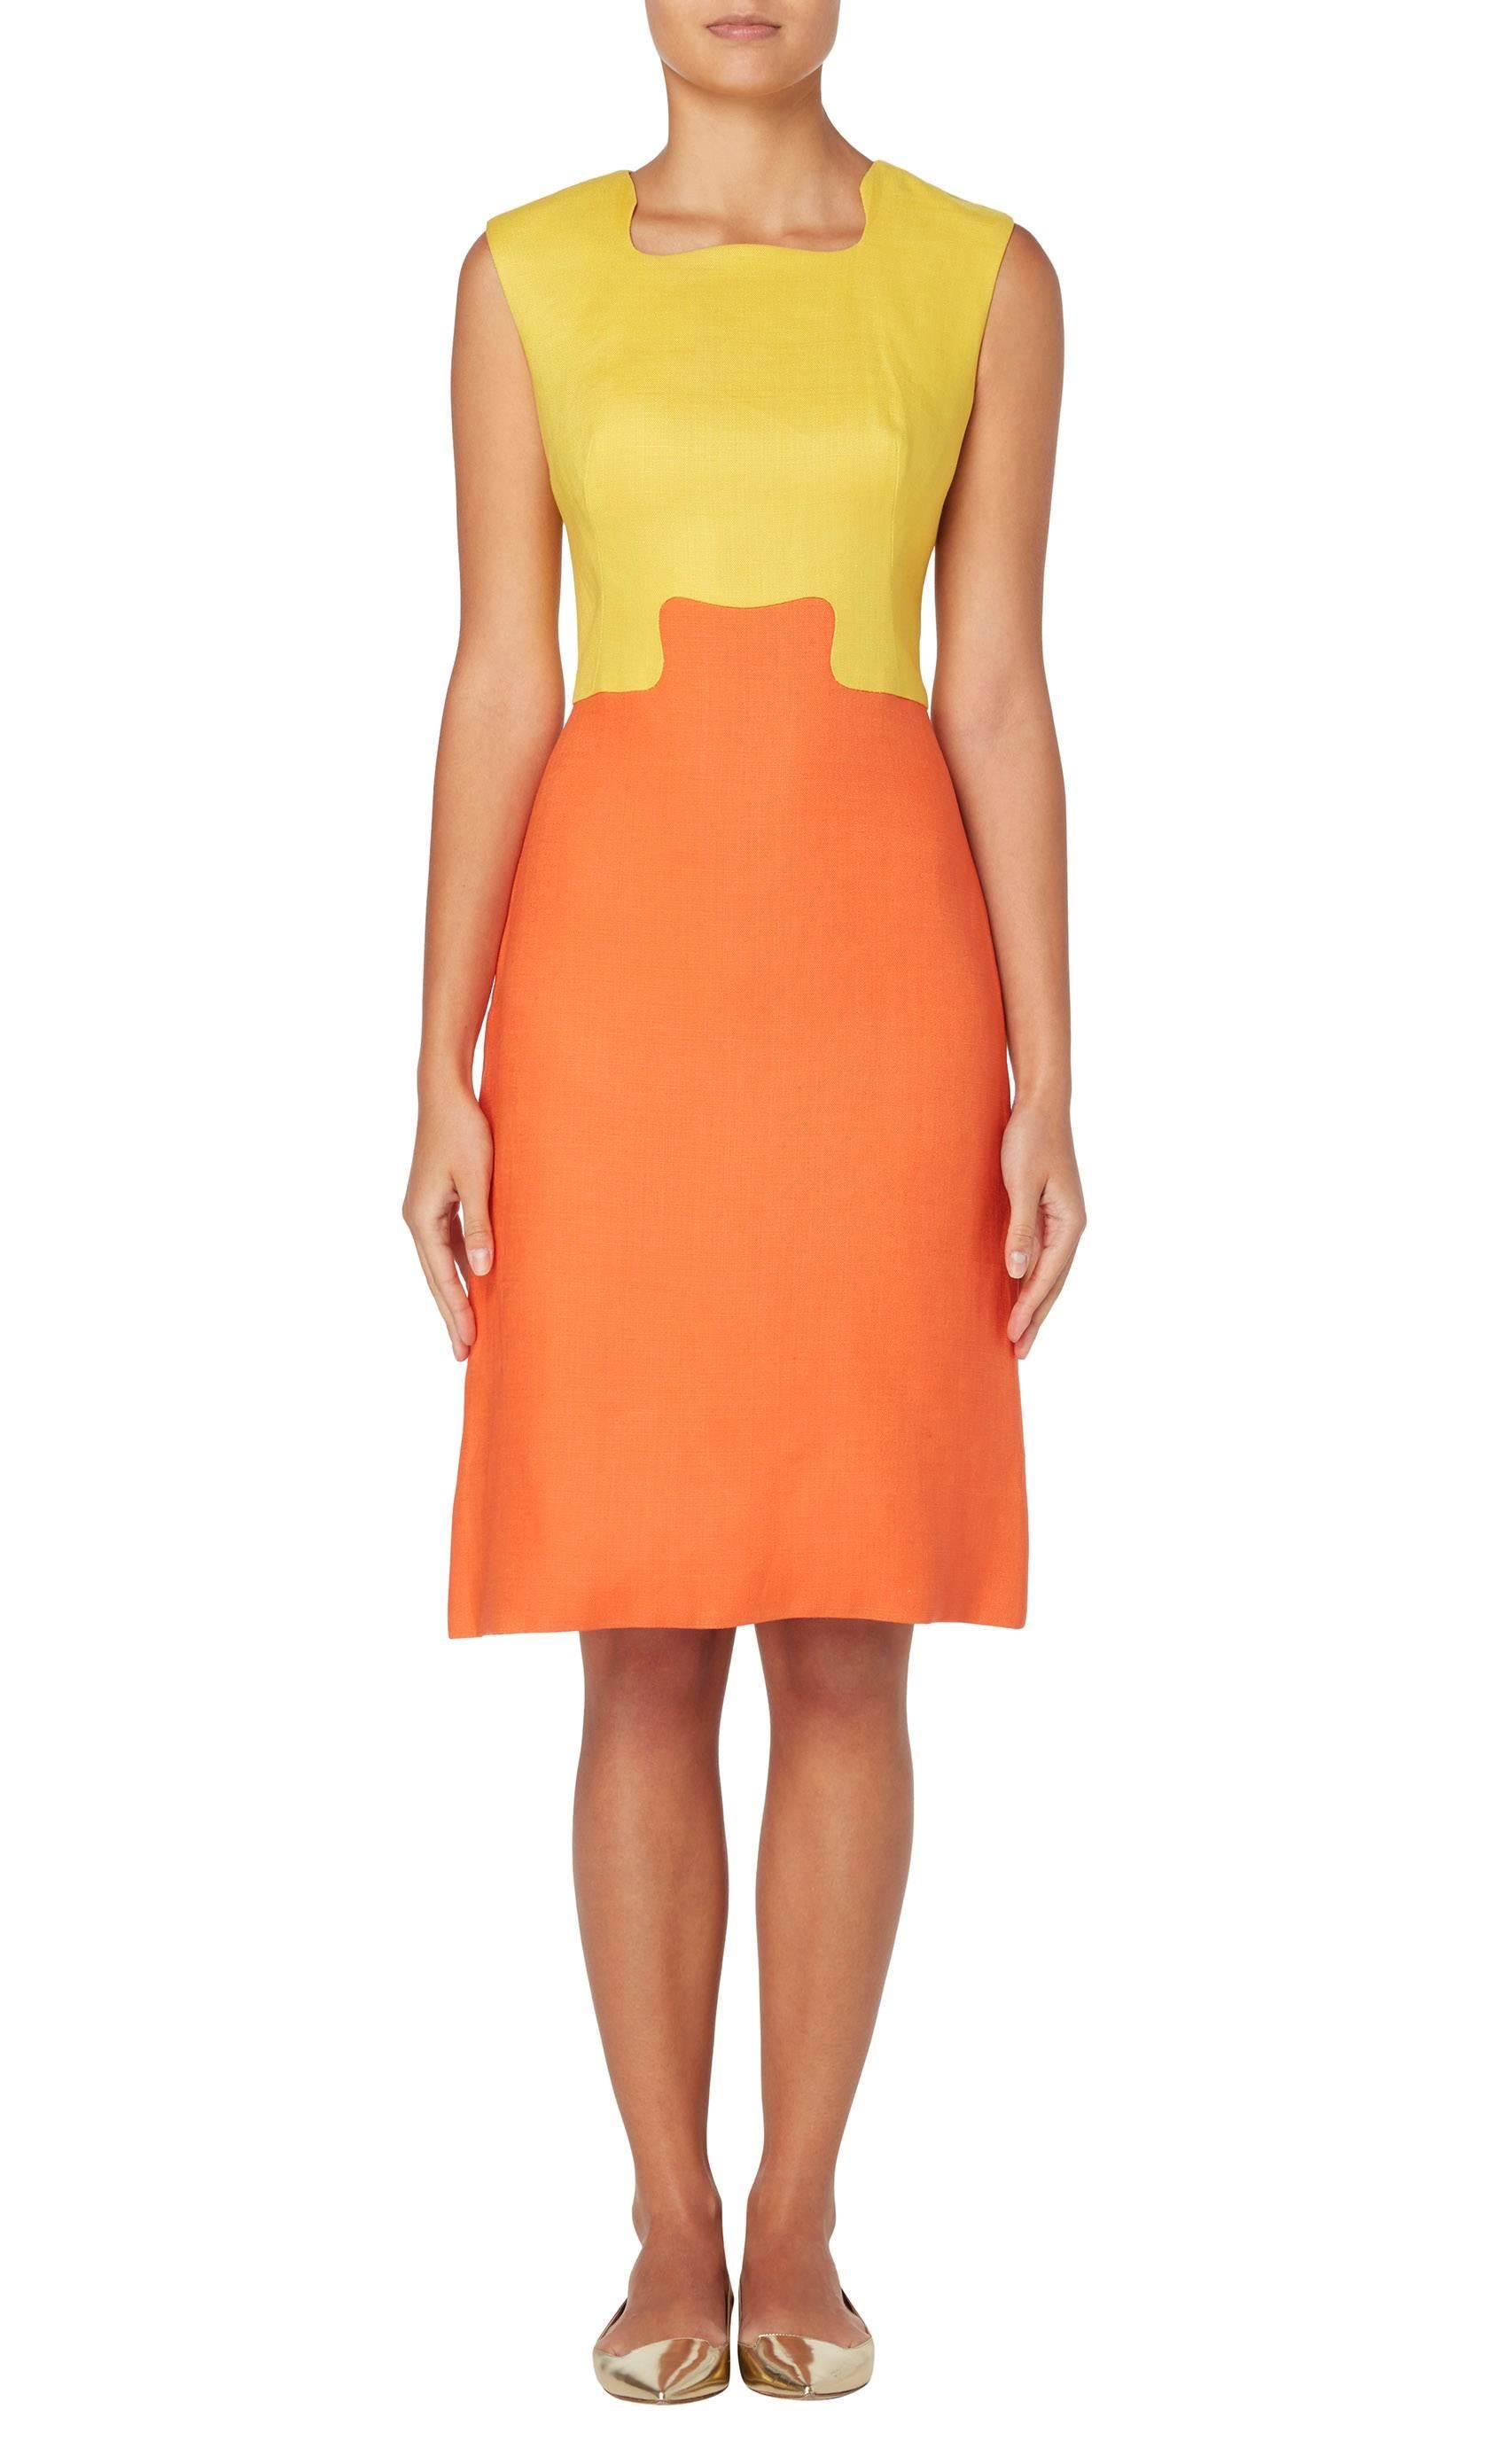 This vibrant Dynasty shift dress is a great way of introducing a pop of colour to work wear wardrobe. Constructed in yellow and orange linen, the sleeveless dress features an interlocking detail, highlighting the small of the waist.

Constructed